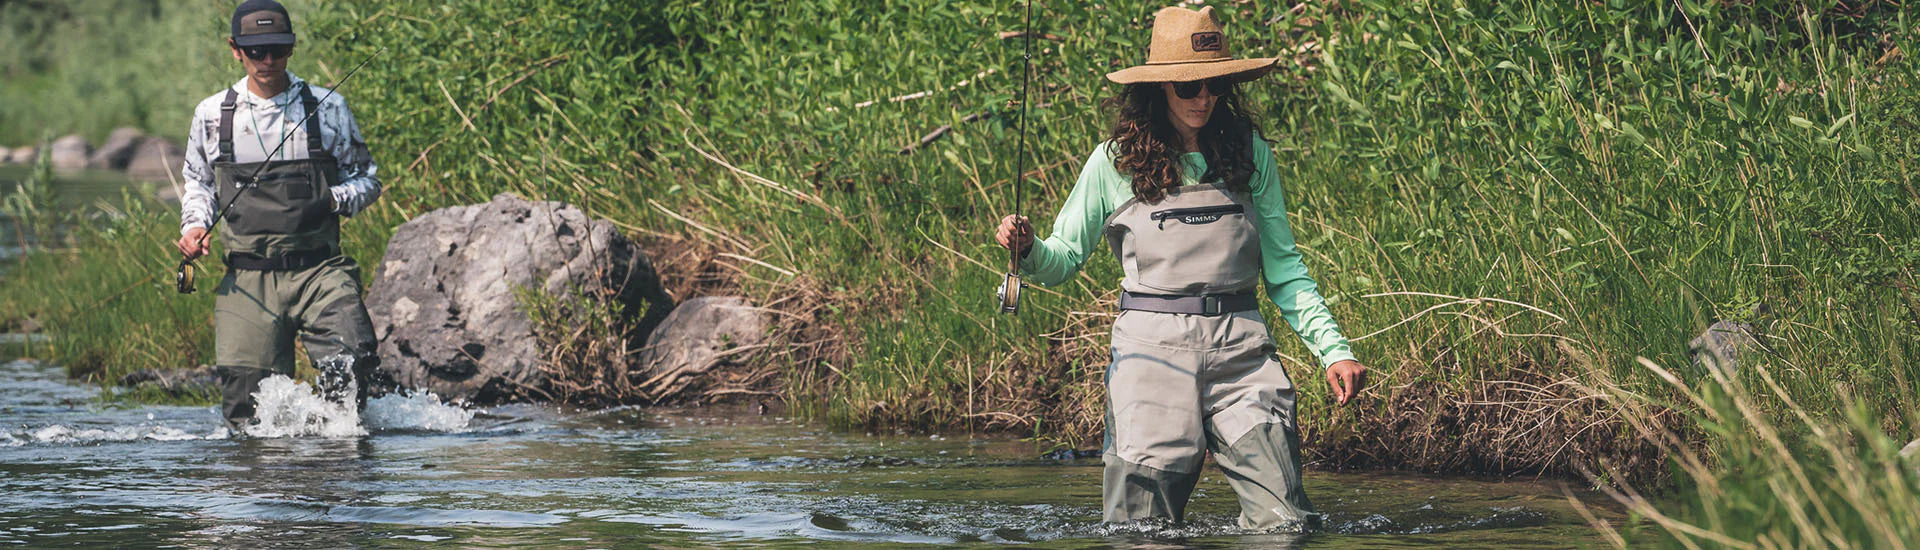 Waders For Women